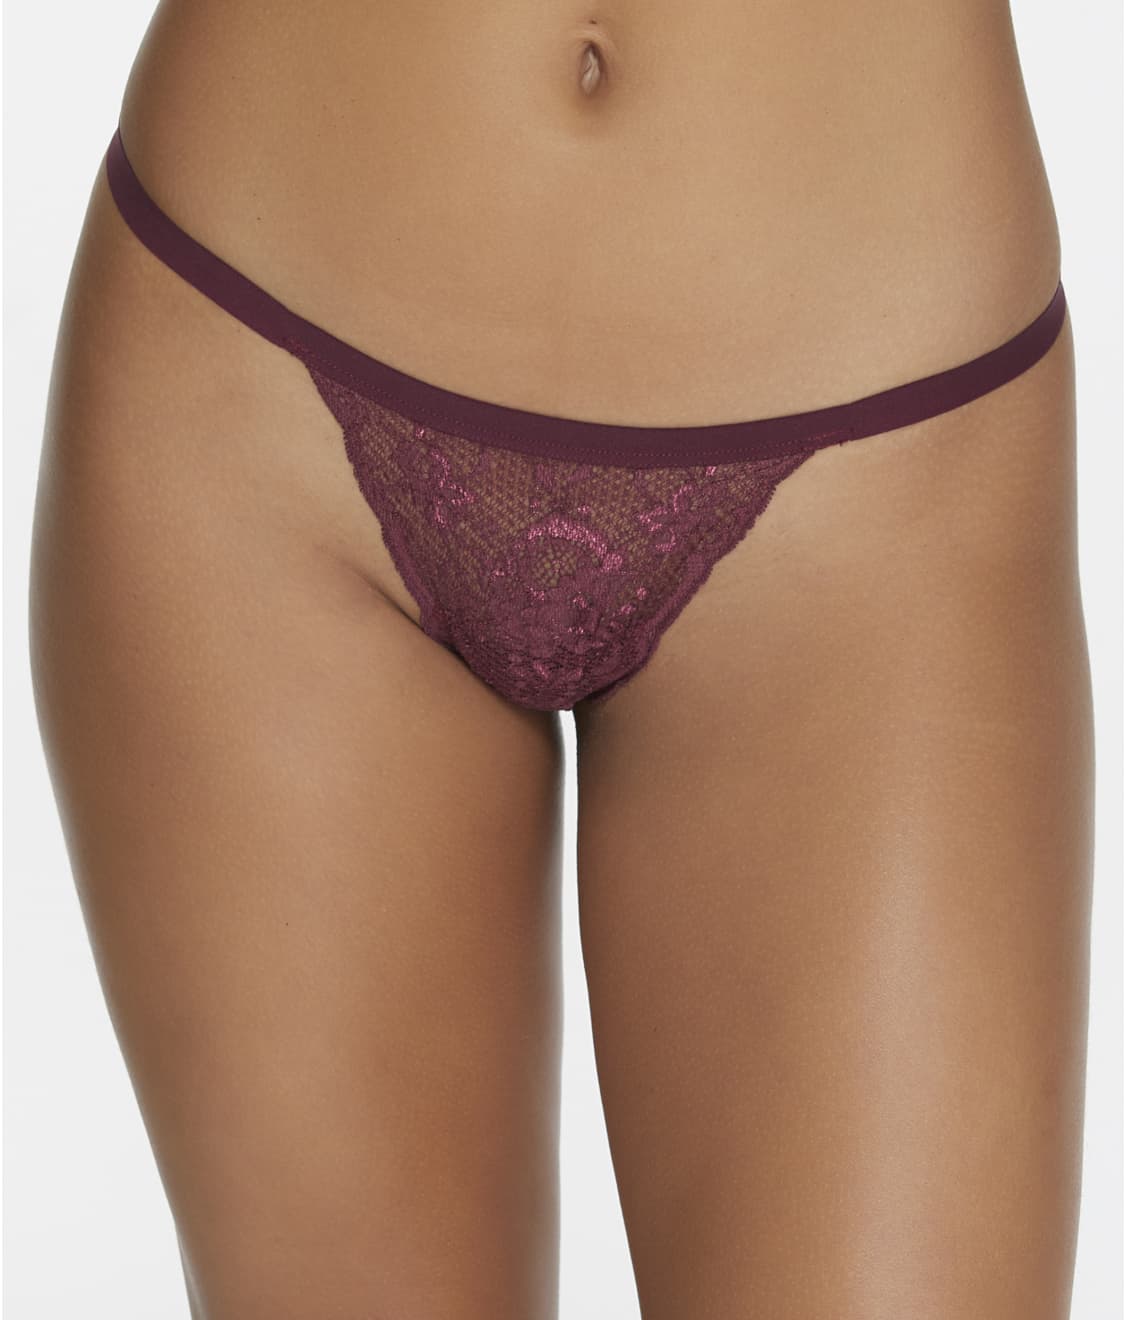 OS Cosabella Never Say Never Skimpie G-String in Deep Ruby SALE